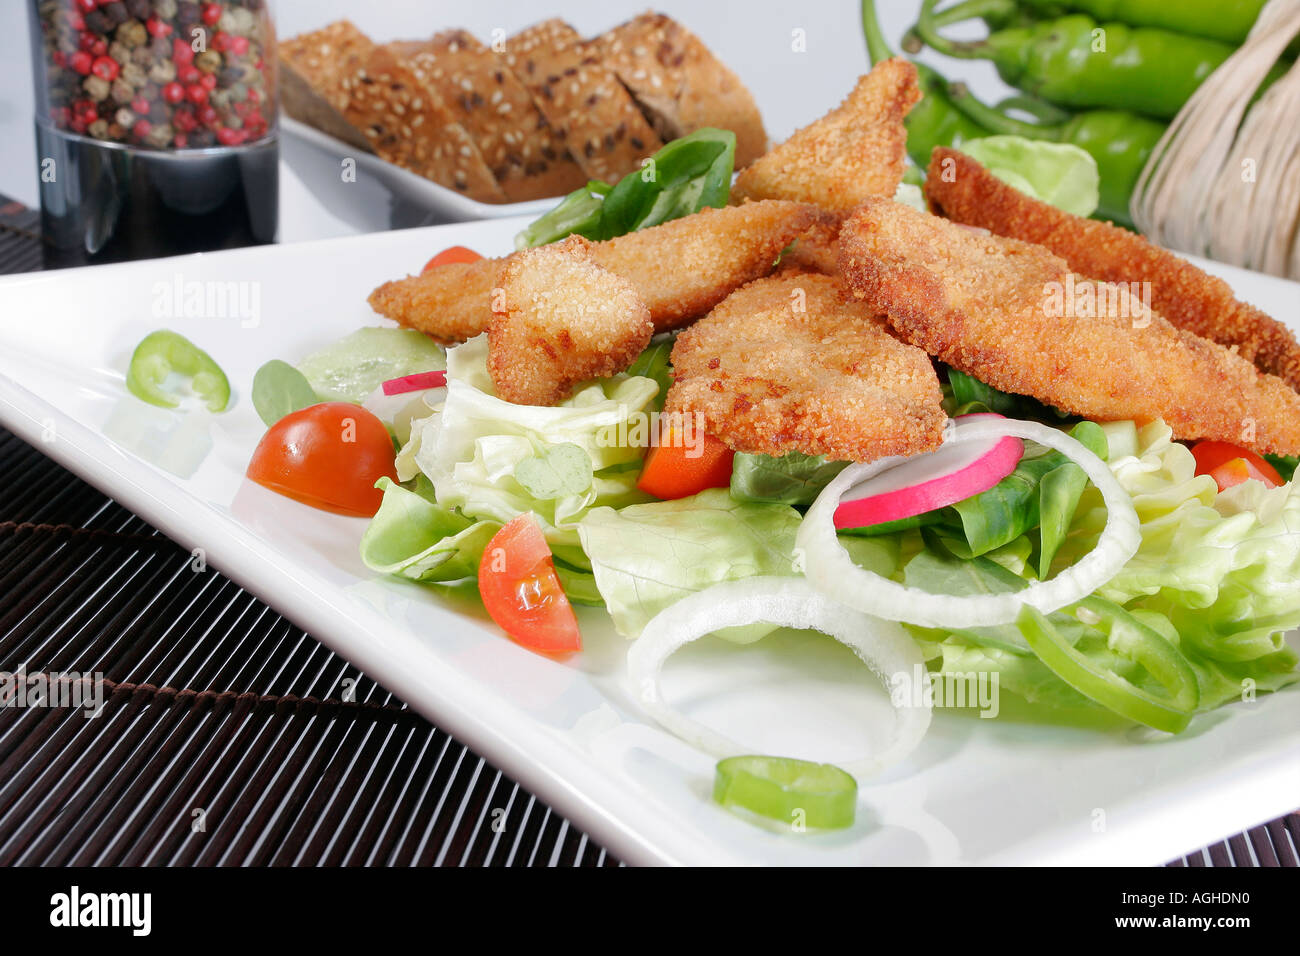 Chicken with salad close up Stock Photo